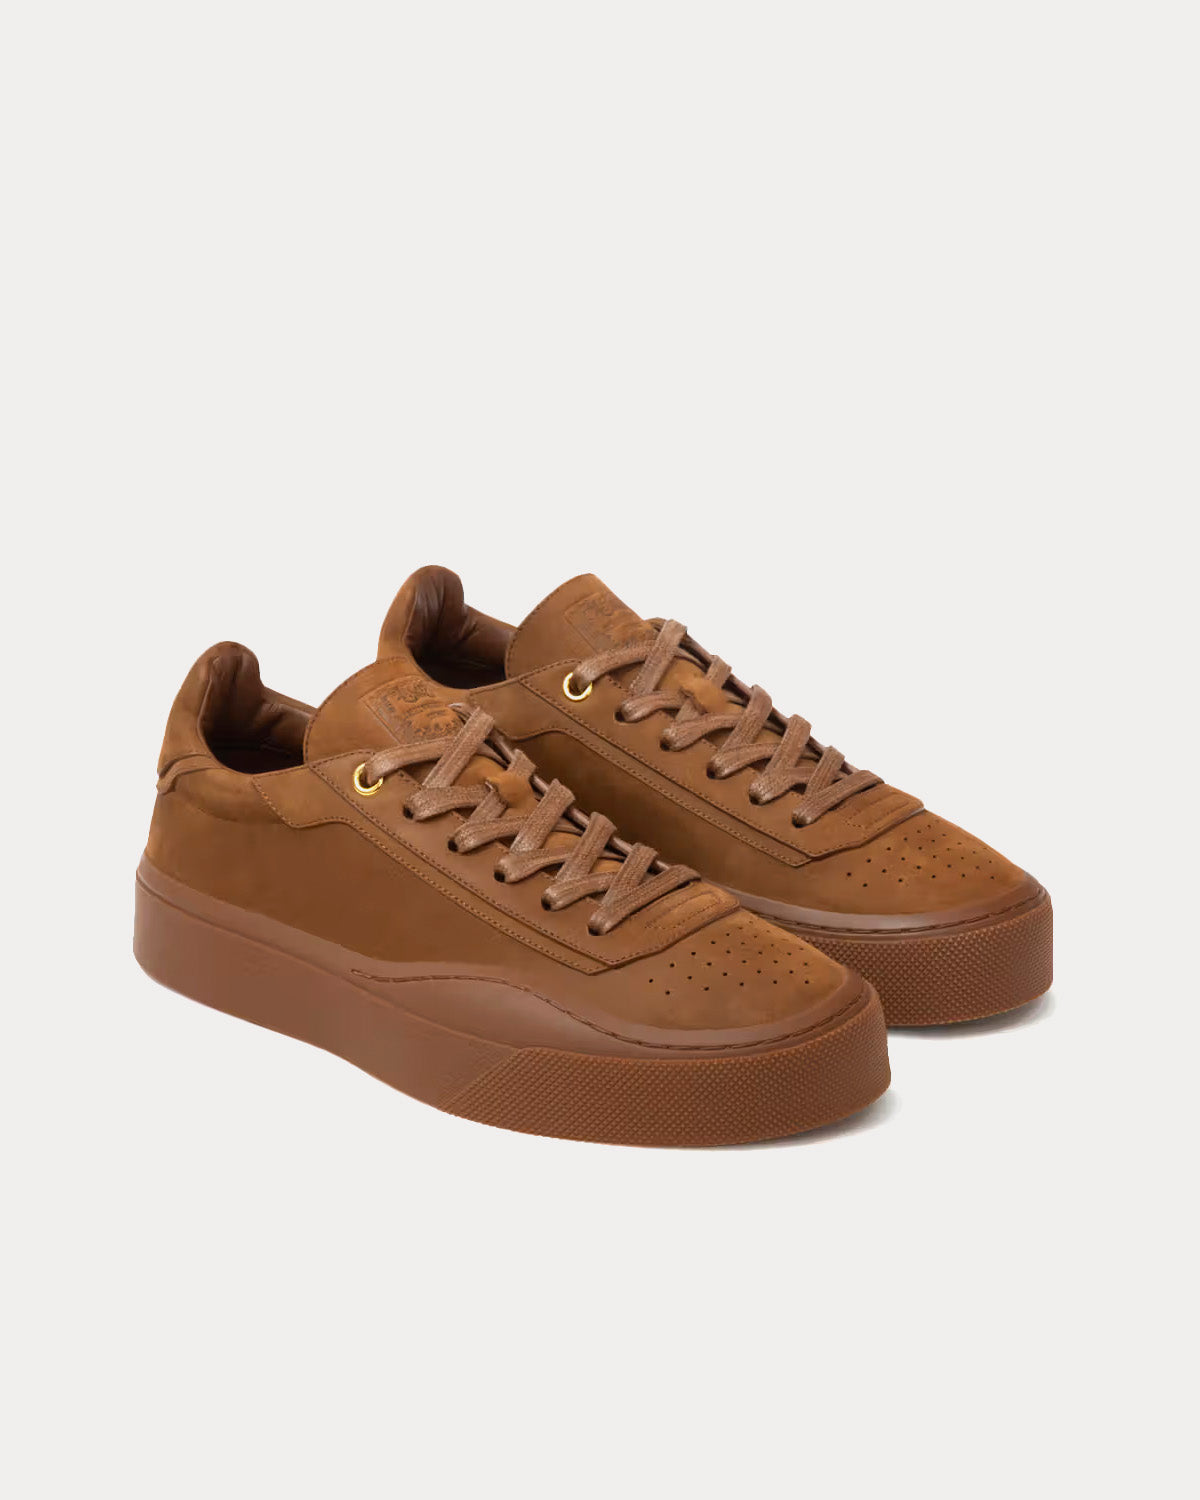 Hennessy - HNY Low by Kim Jones Brown Low Top Sneakers